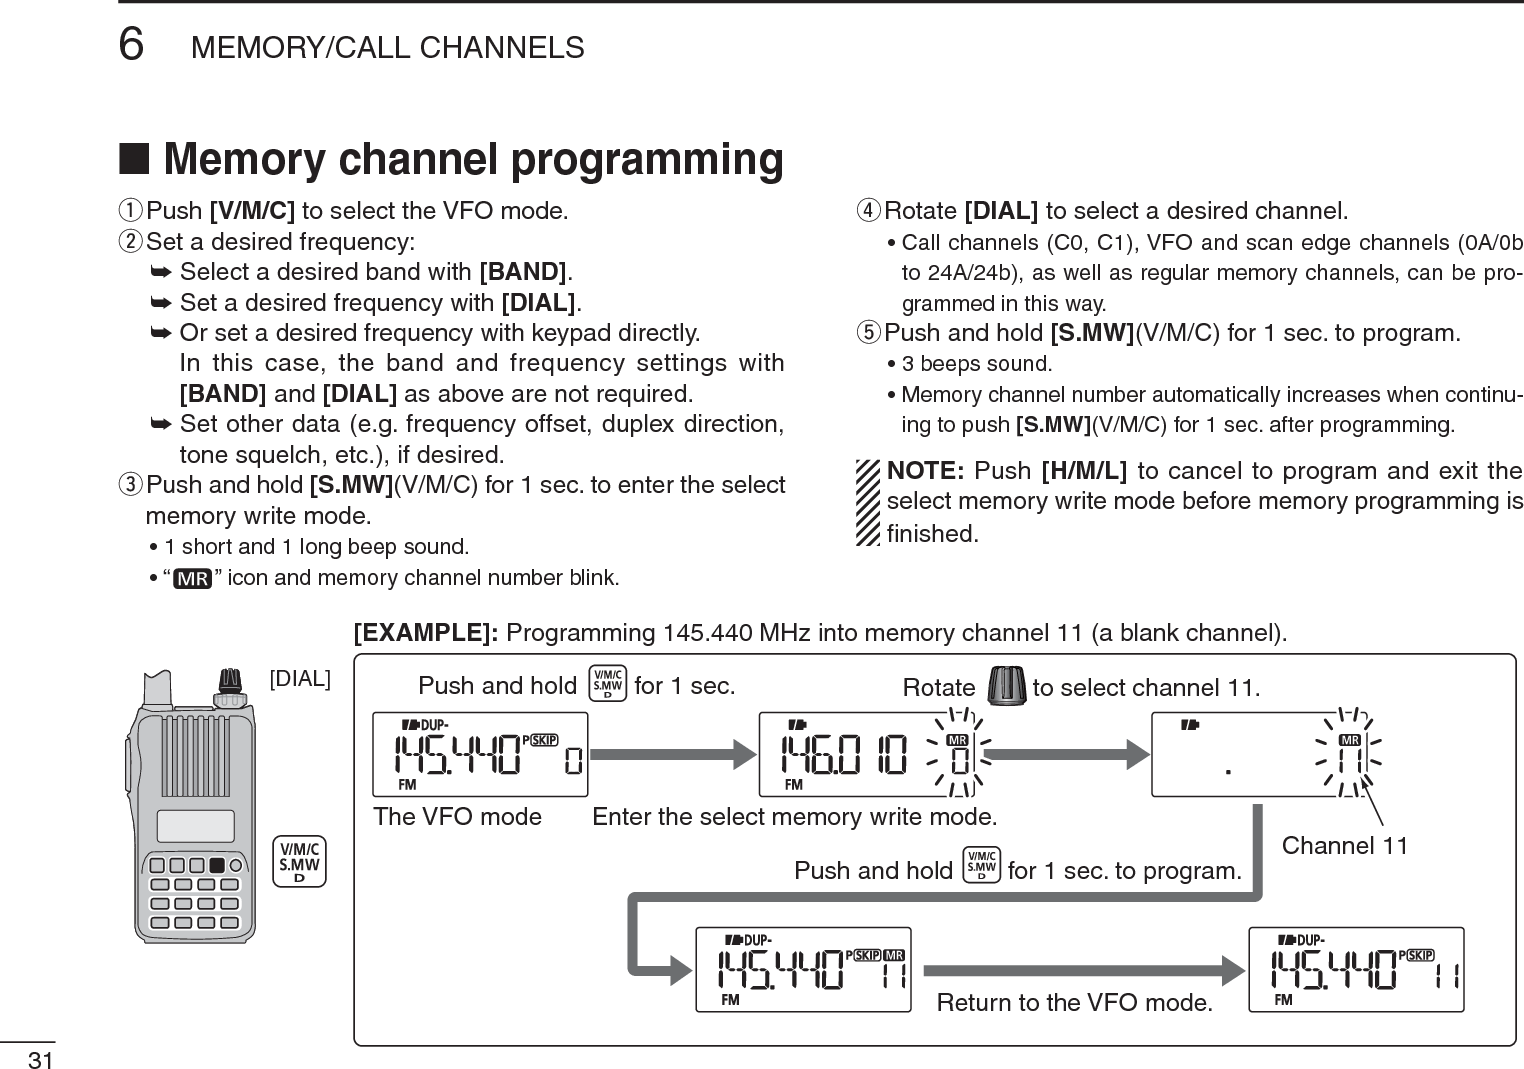 316MEMORY/CALL CHANNELSqPush [V/M/C] to select the VFO mode.wSet a desired frequency:± Select a desired band with [BAND].± Set a desired frequency with [DIAL].± Or set a desired frequency with keypad directly.  In this case, the band and frequency settings with [BAND] and [DIAL] as above are not required.±Set other data (e.g. frequency offset, duplex direction, tone squelch, etc.), if desired.e  Push and hold [S.MW](V/M/C) for 1 sec. to enter the select memory write mode.• 1 short and 1 long beep sound.•“ ” icon and memory channel number blink.rRotate [DIAL] to select a desired channel.• Call channels (C0, C1), VFO and scan edge channels (0A/0b to 24A/24b), as well as regular memory channels, can be pro-grammed in this way.tPush and hold [S.MW](V/M/C) for 1 sec. to program.• 3 beeps sound.• Memory channel number automatically increases when continu-ing to push [S.MW](V/M/C) for 1 sec. after programming.NOTE: Push [H/M/L] to cancel to program and exit the select memory write mode before memory programming is ﬁnished.[DIAL]The VFO mode Enter the select memory write mode.to select channel 11.RotatePush and hold for 1 sec.Return to the VFO mode.Push and hold for 1 sec. to program.[EXAMPLE]: Programming 145.440 MHz into memory channel 11 (a blank channel).Channel 11NMemory channel programming